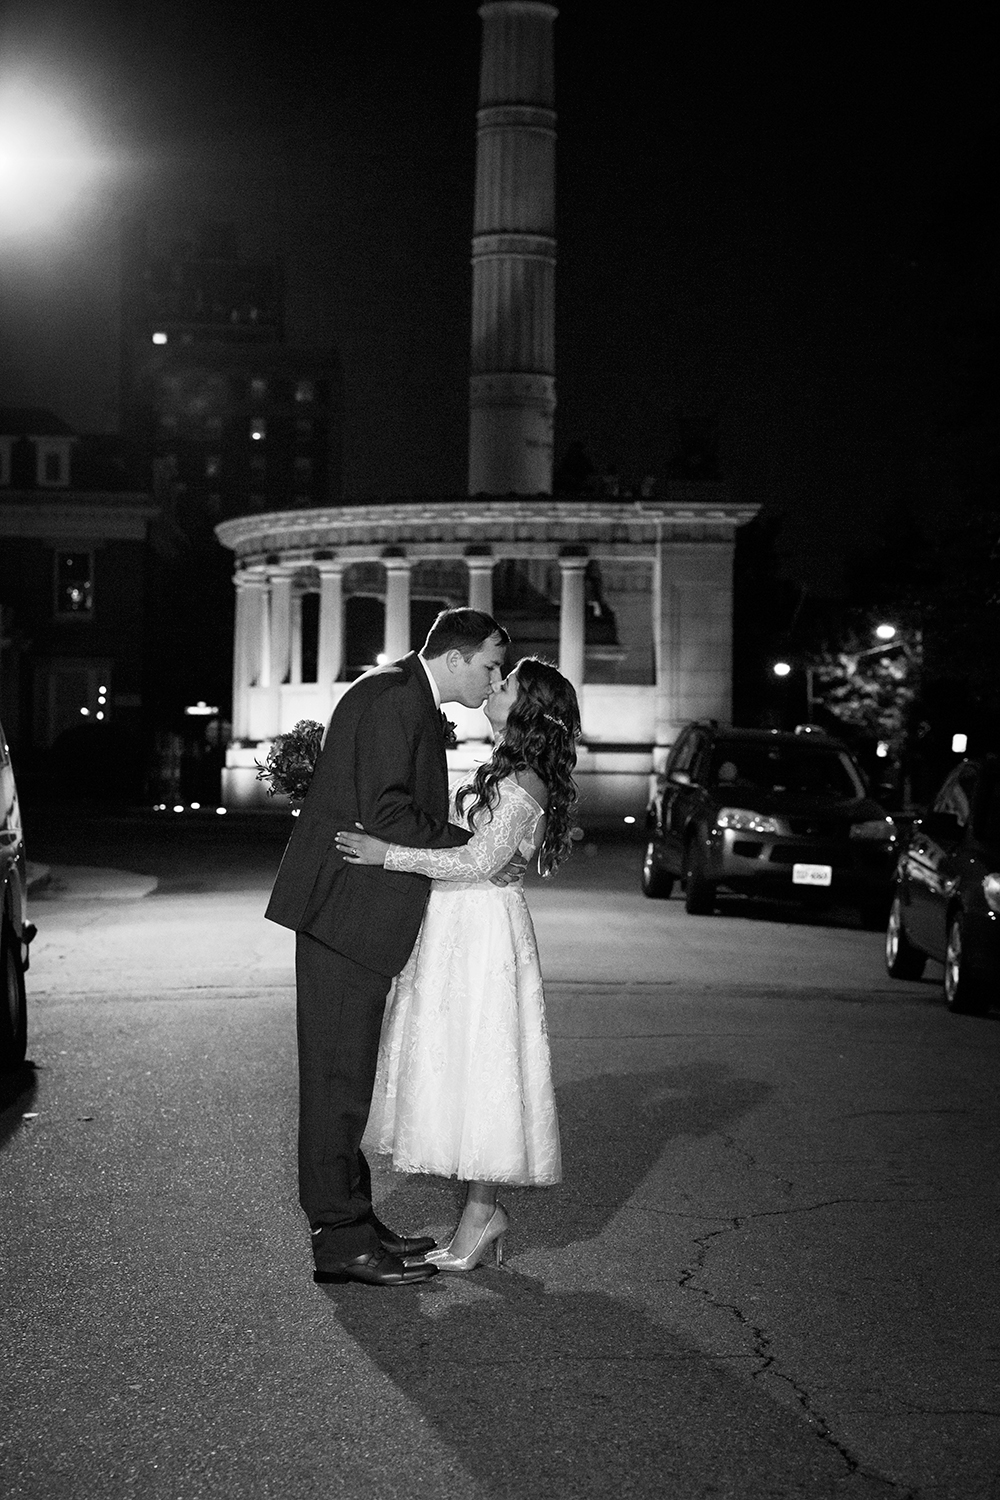 Sarah  Chriss Fall Wedding at The Branch Museum - Image Property of www.j-dphoto.com